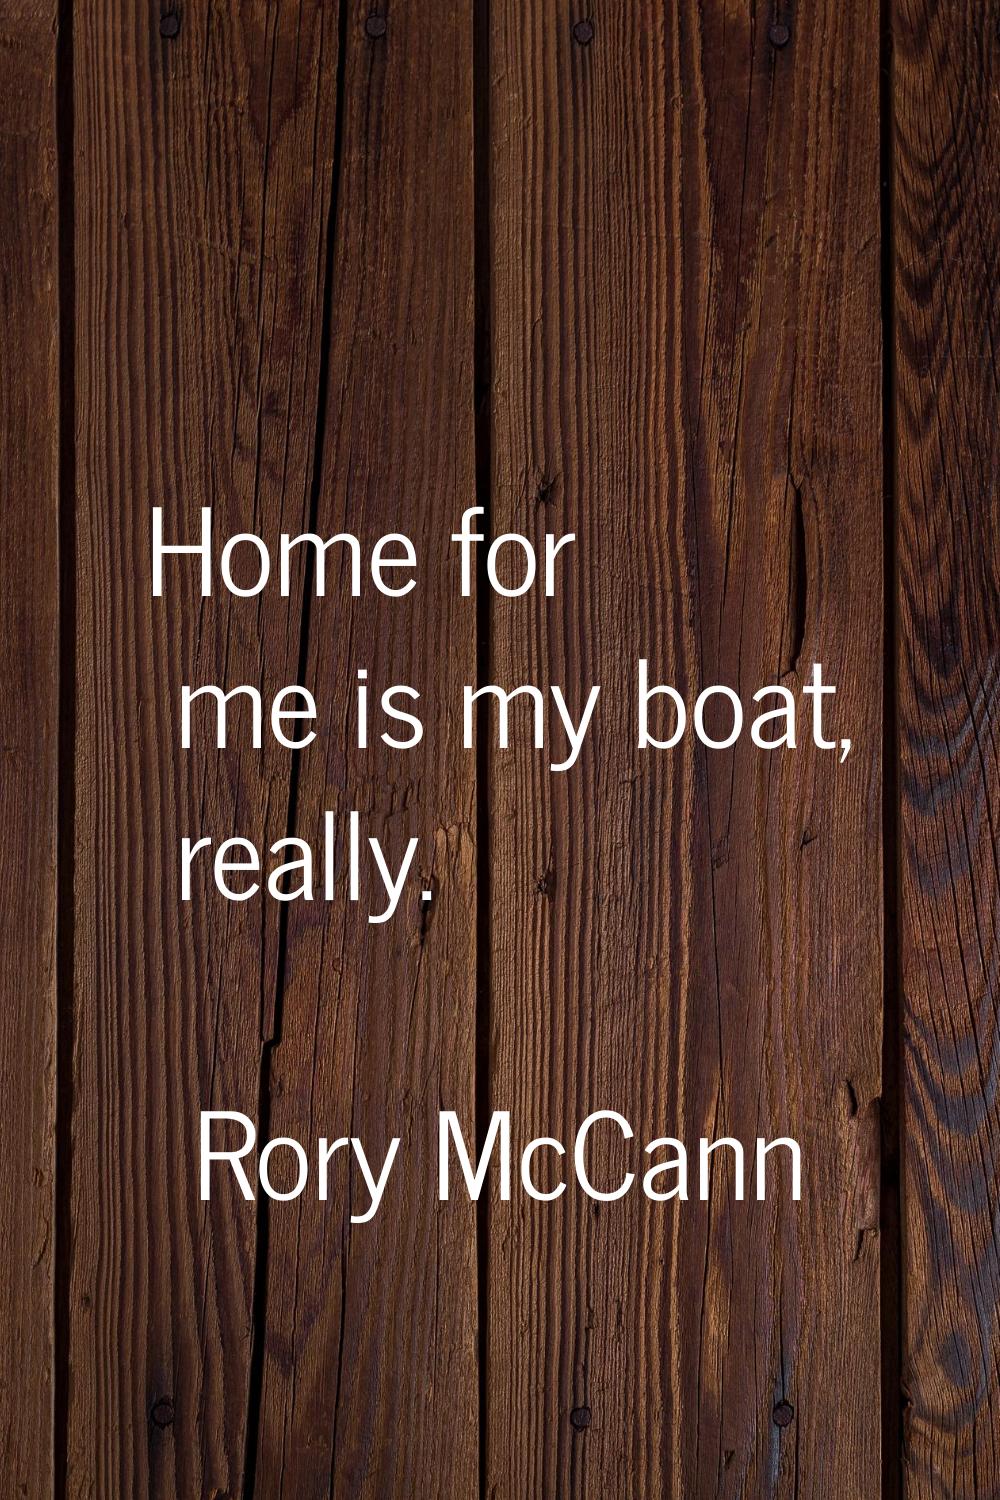 Home for me is my boat, really.